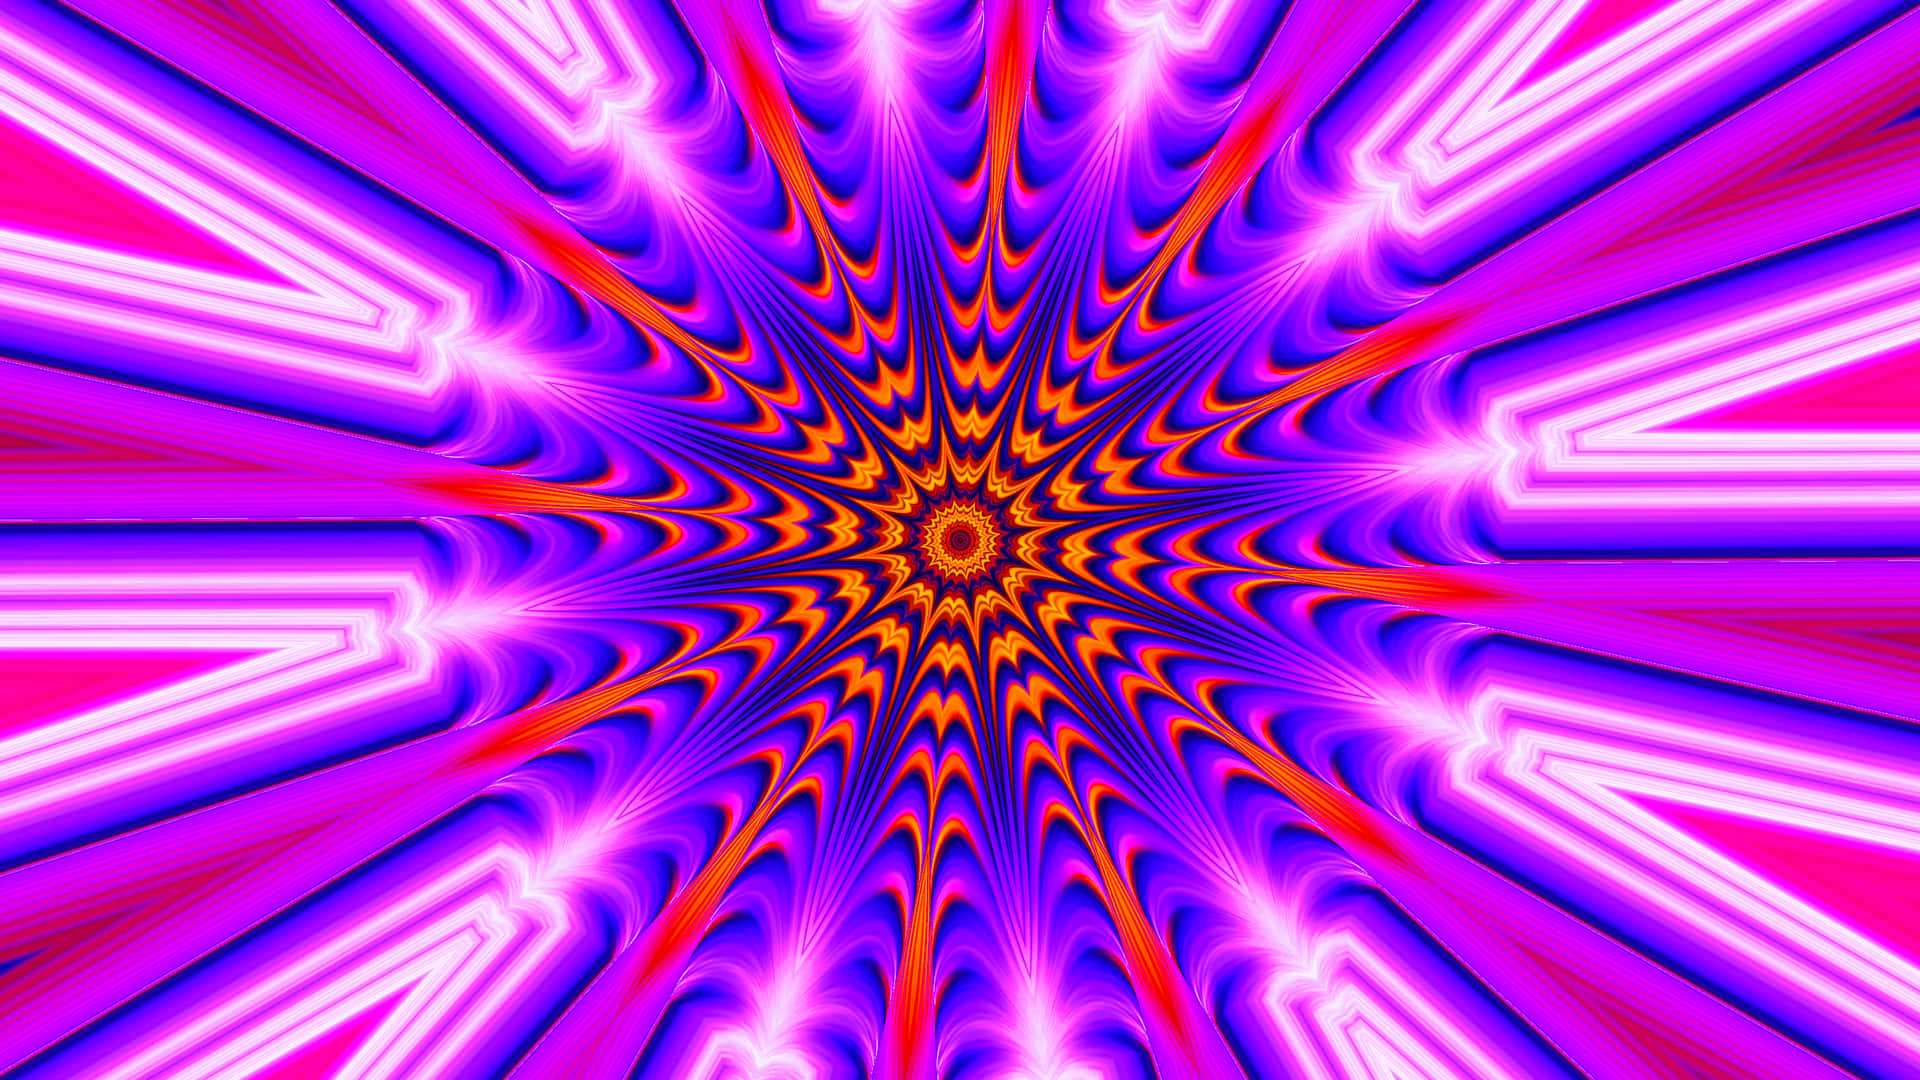 Cool Optical Illusions Psychedelic Spiral Wallpaper